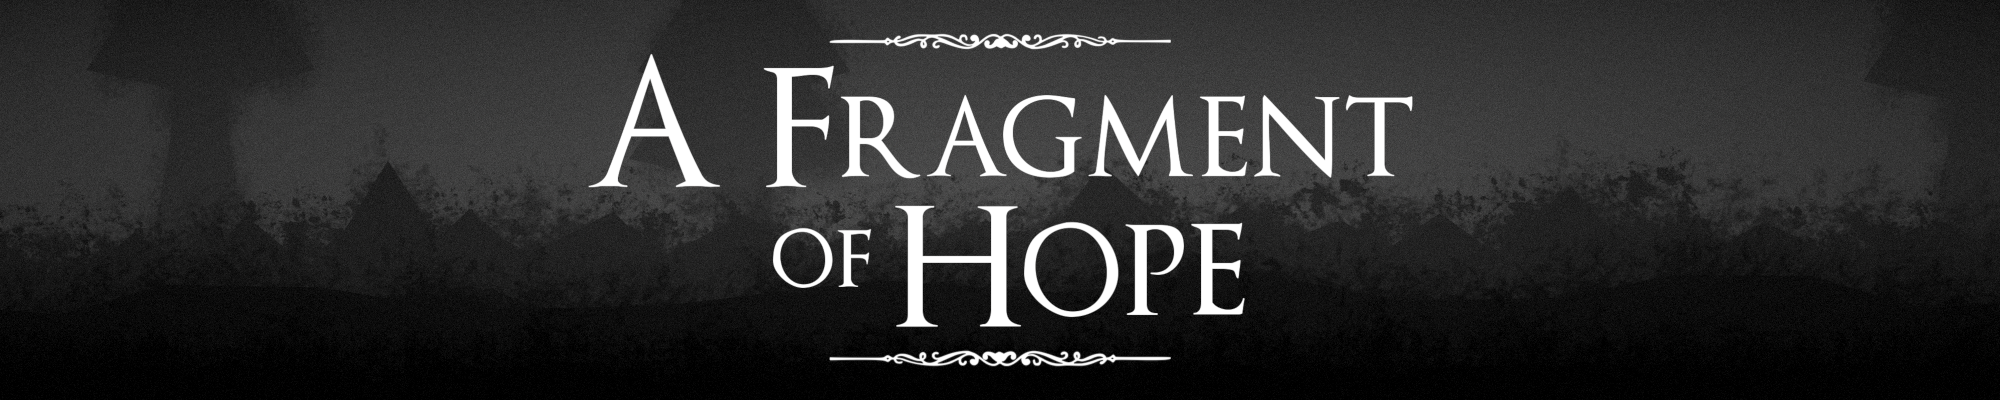 A Fragment of Hope